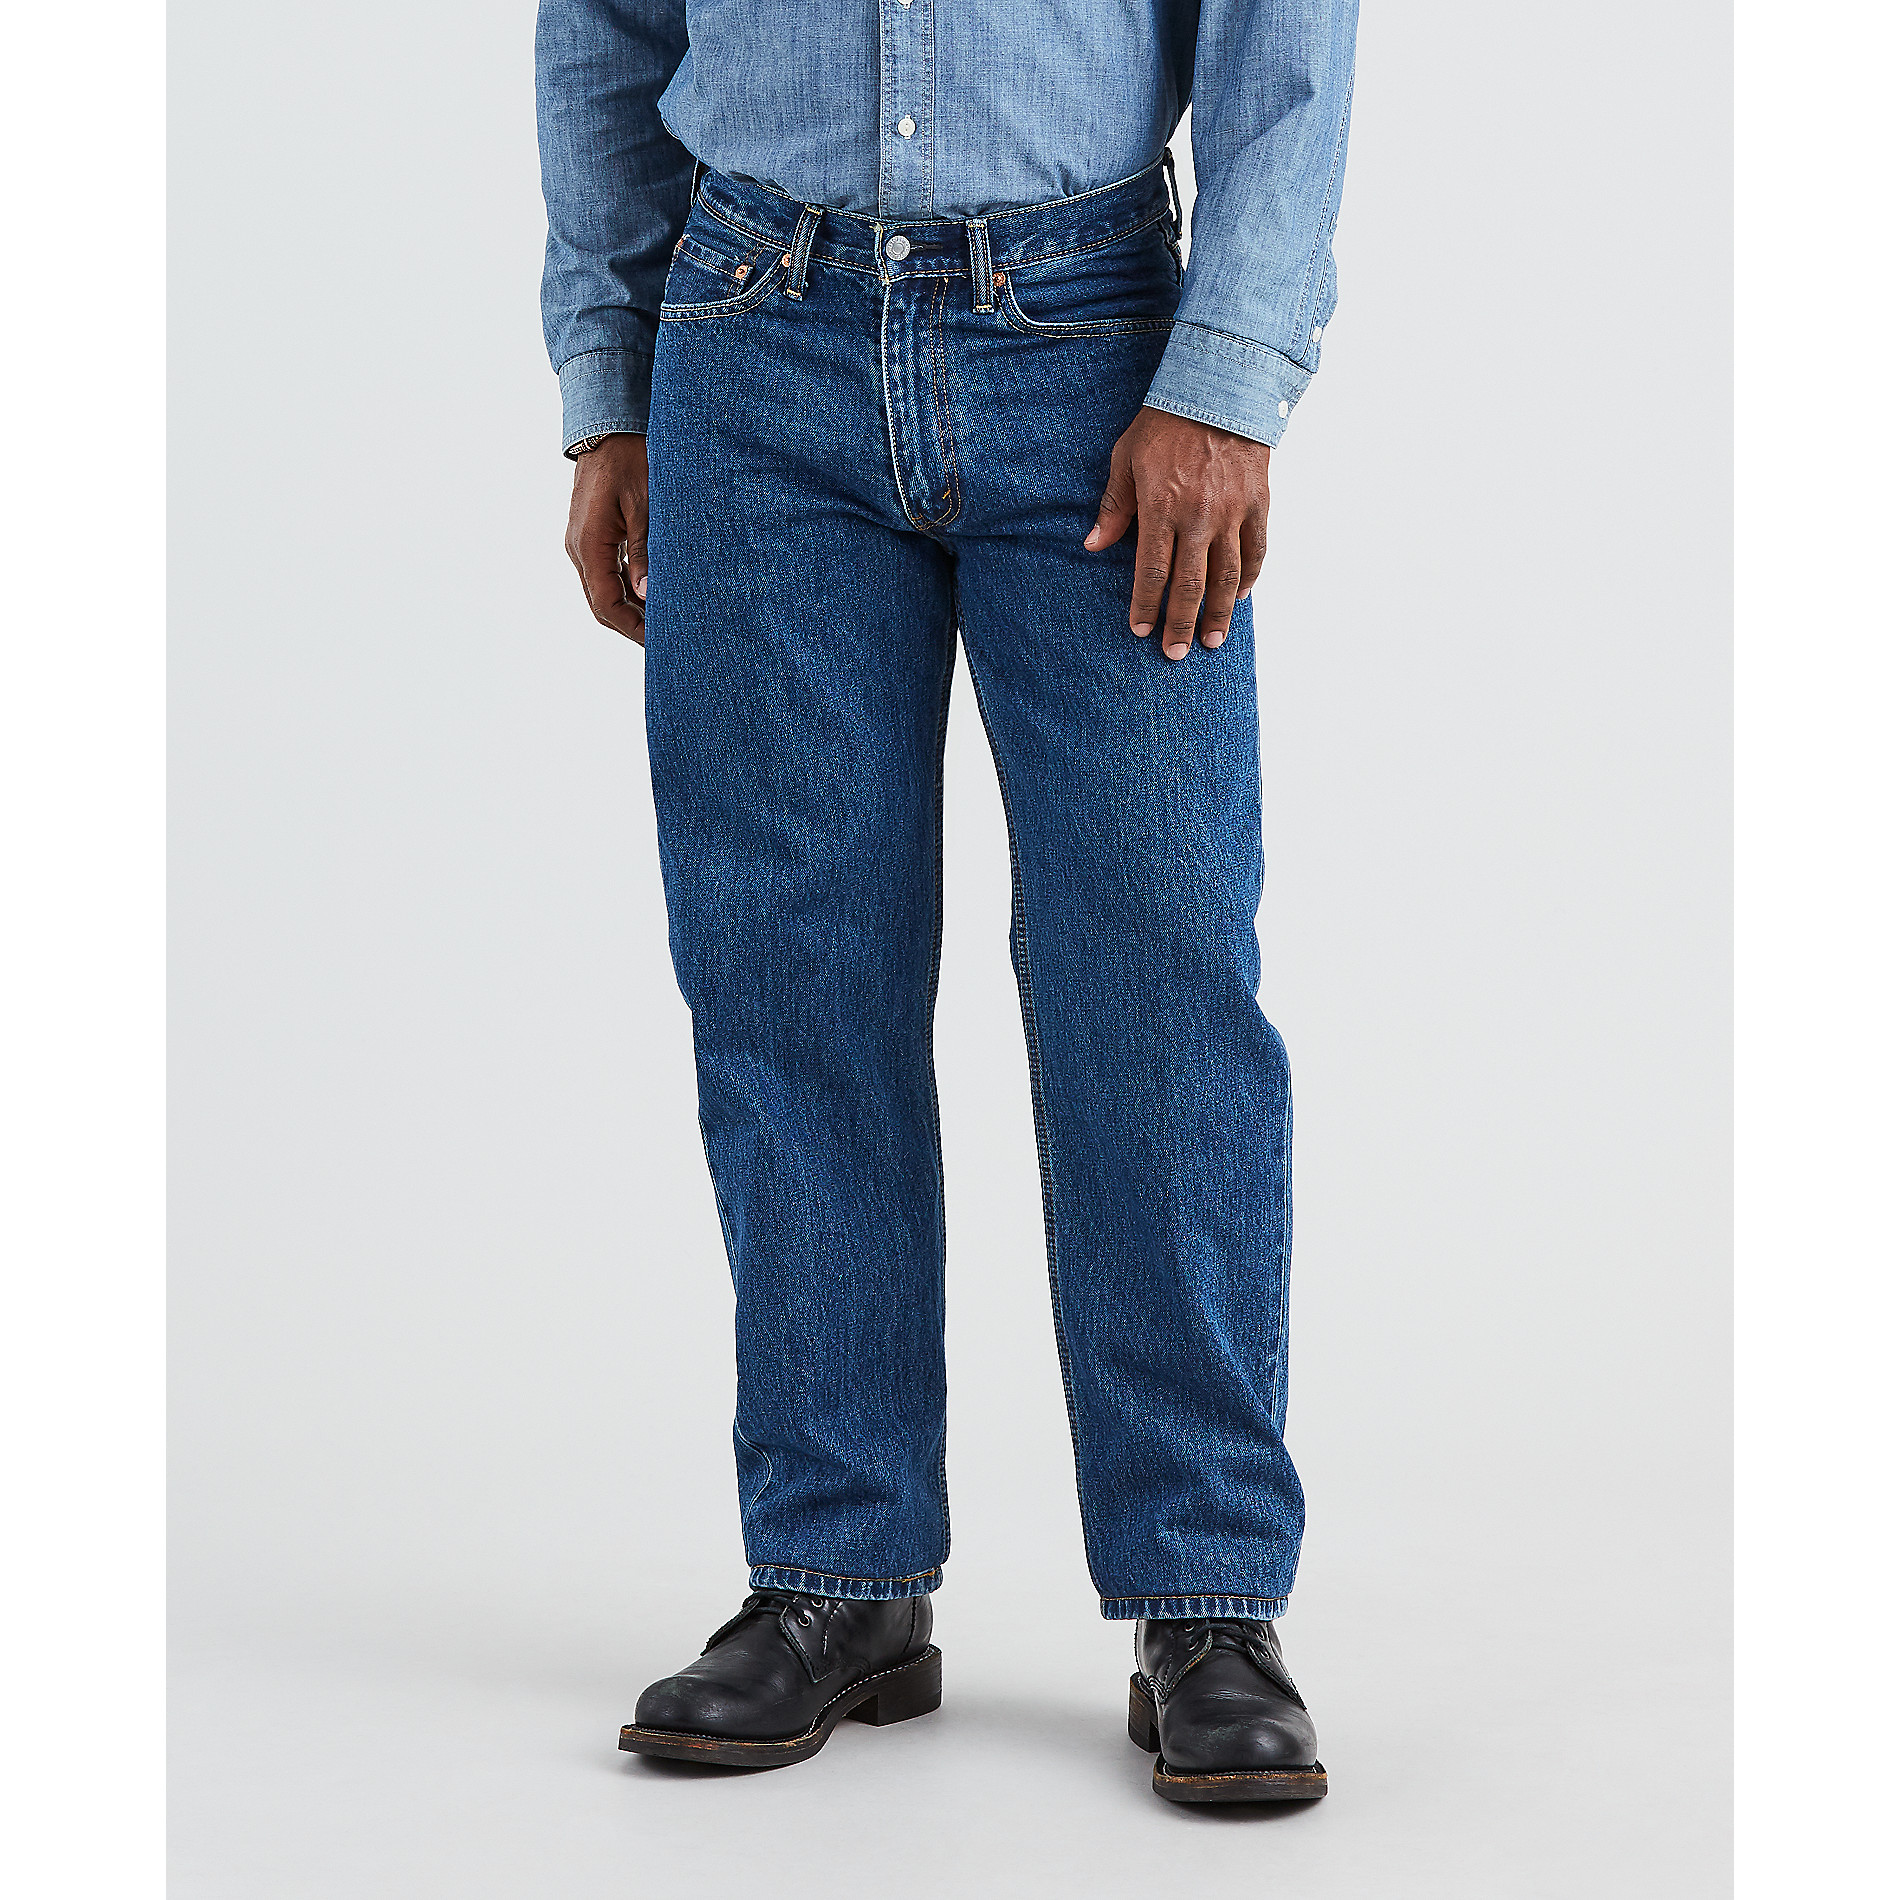 Levi's Men's 550 Relaxed Fit Jeans | Shop Your Way: Online Shopping ...